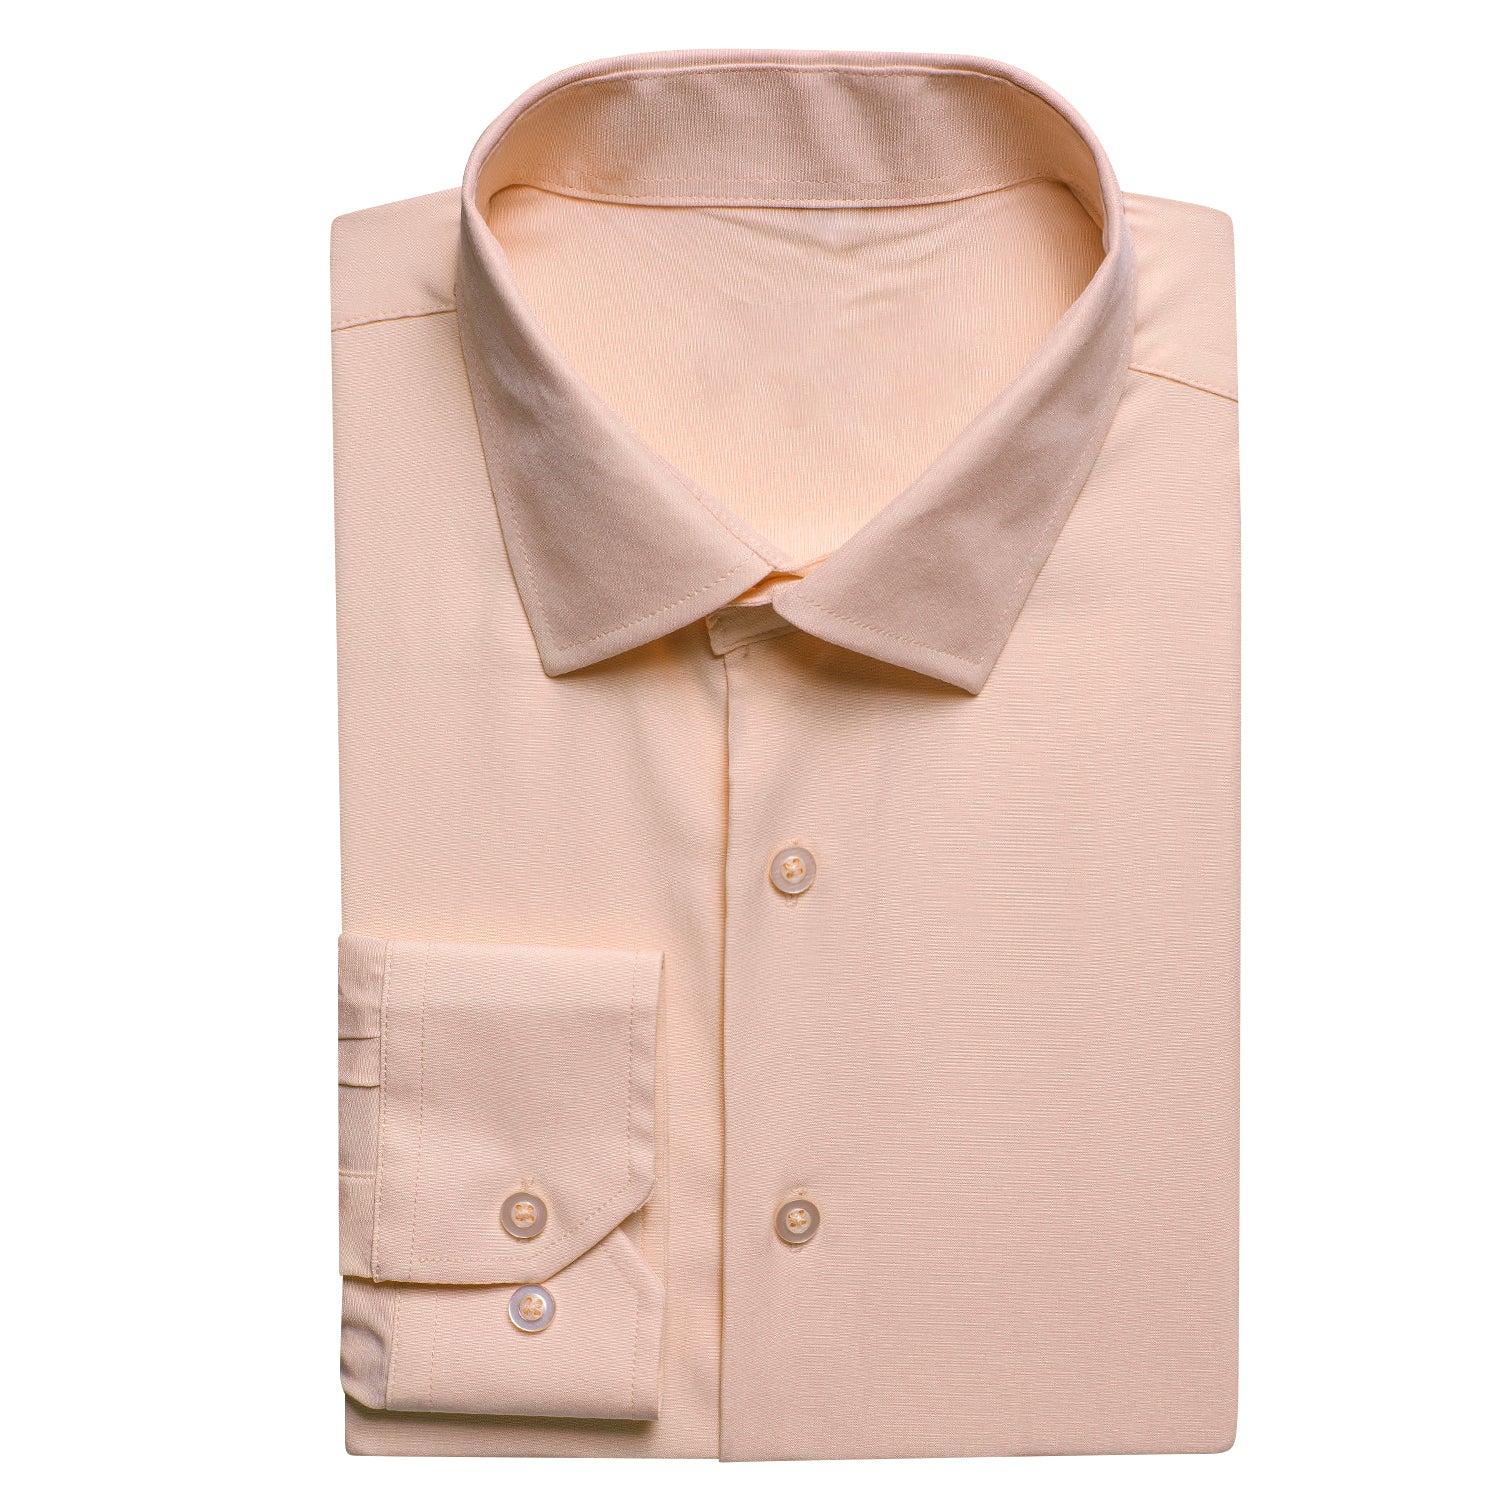 New Pink White Solid Stretch Men's Long Sleeve Dress Shirt